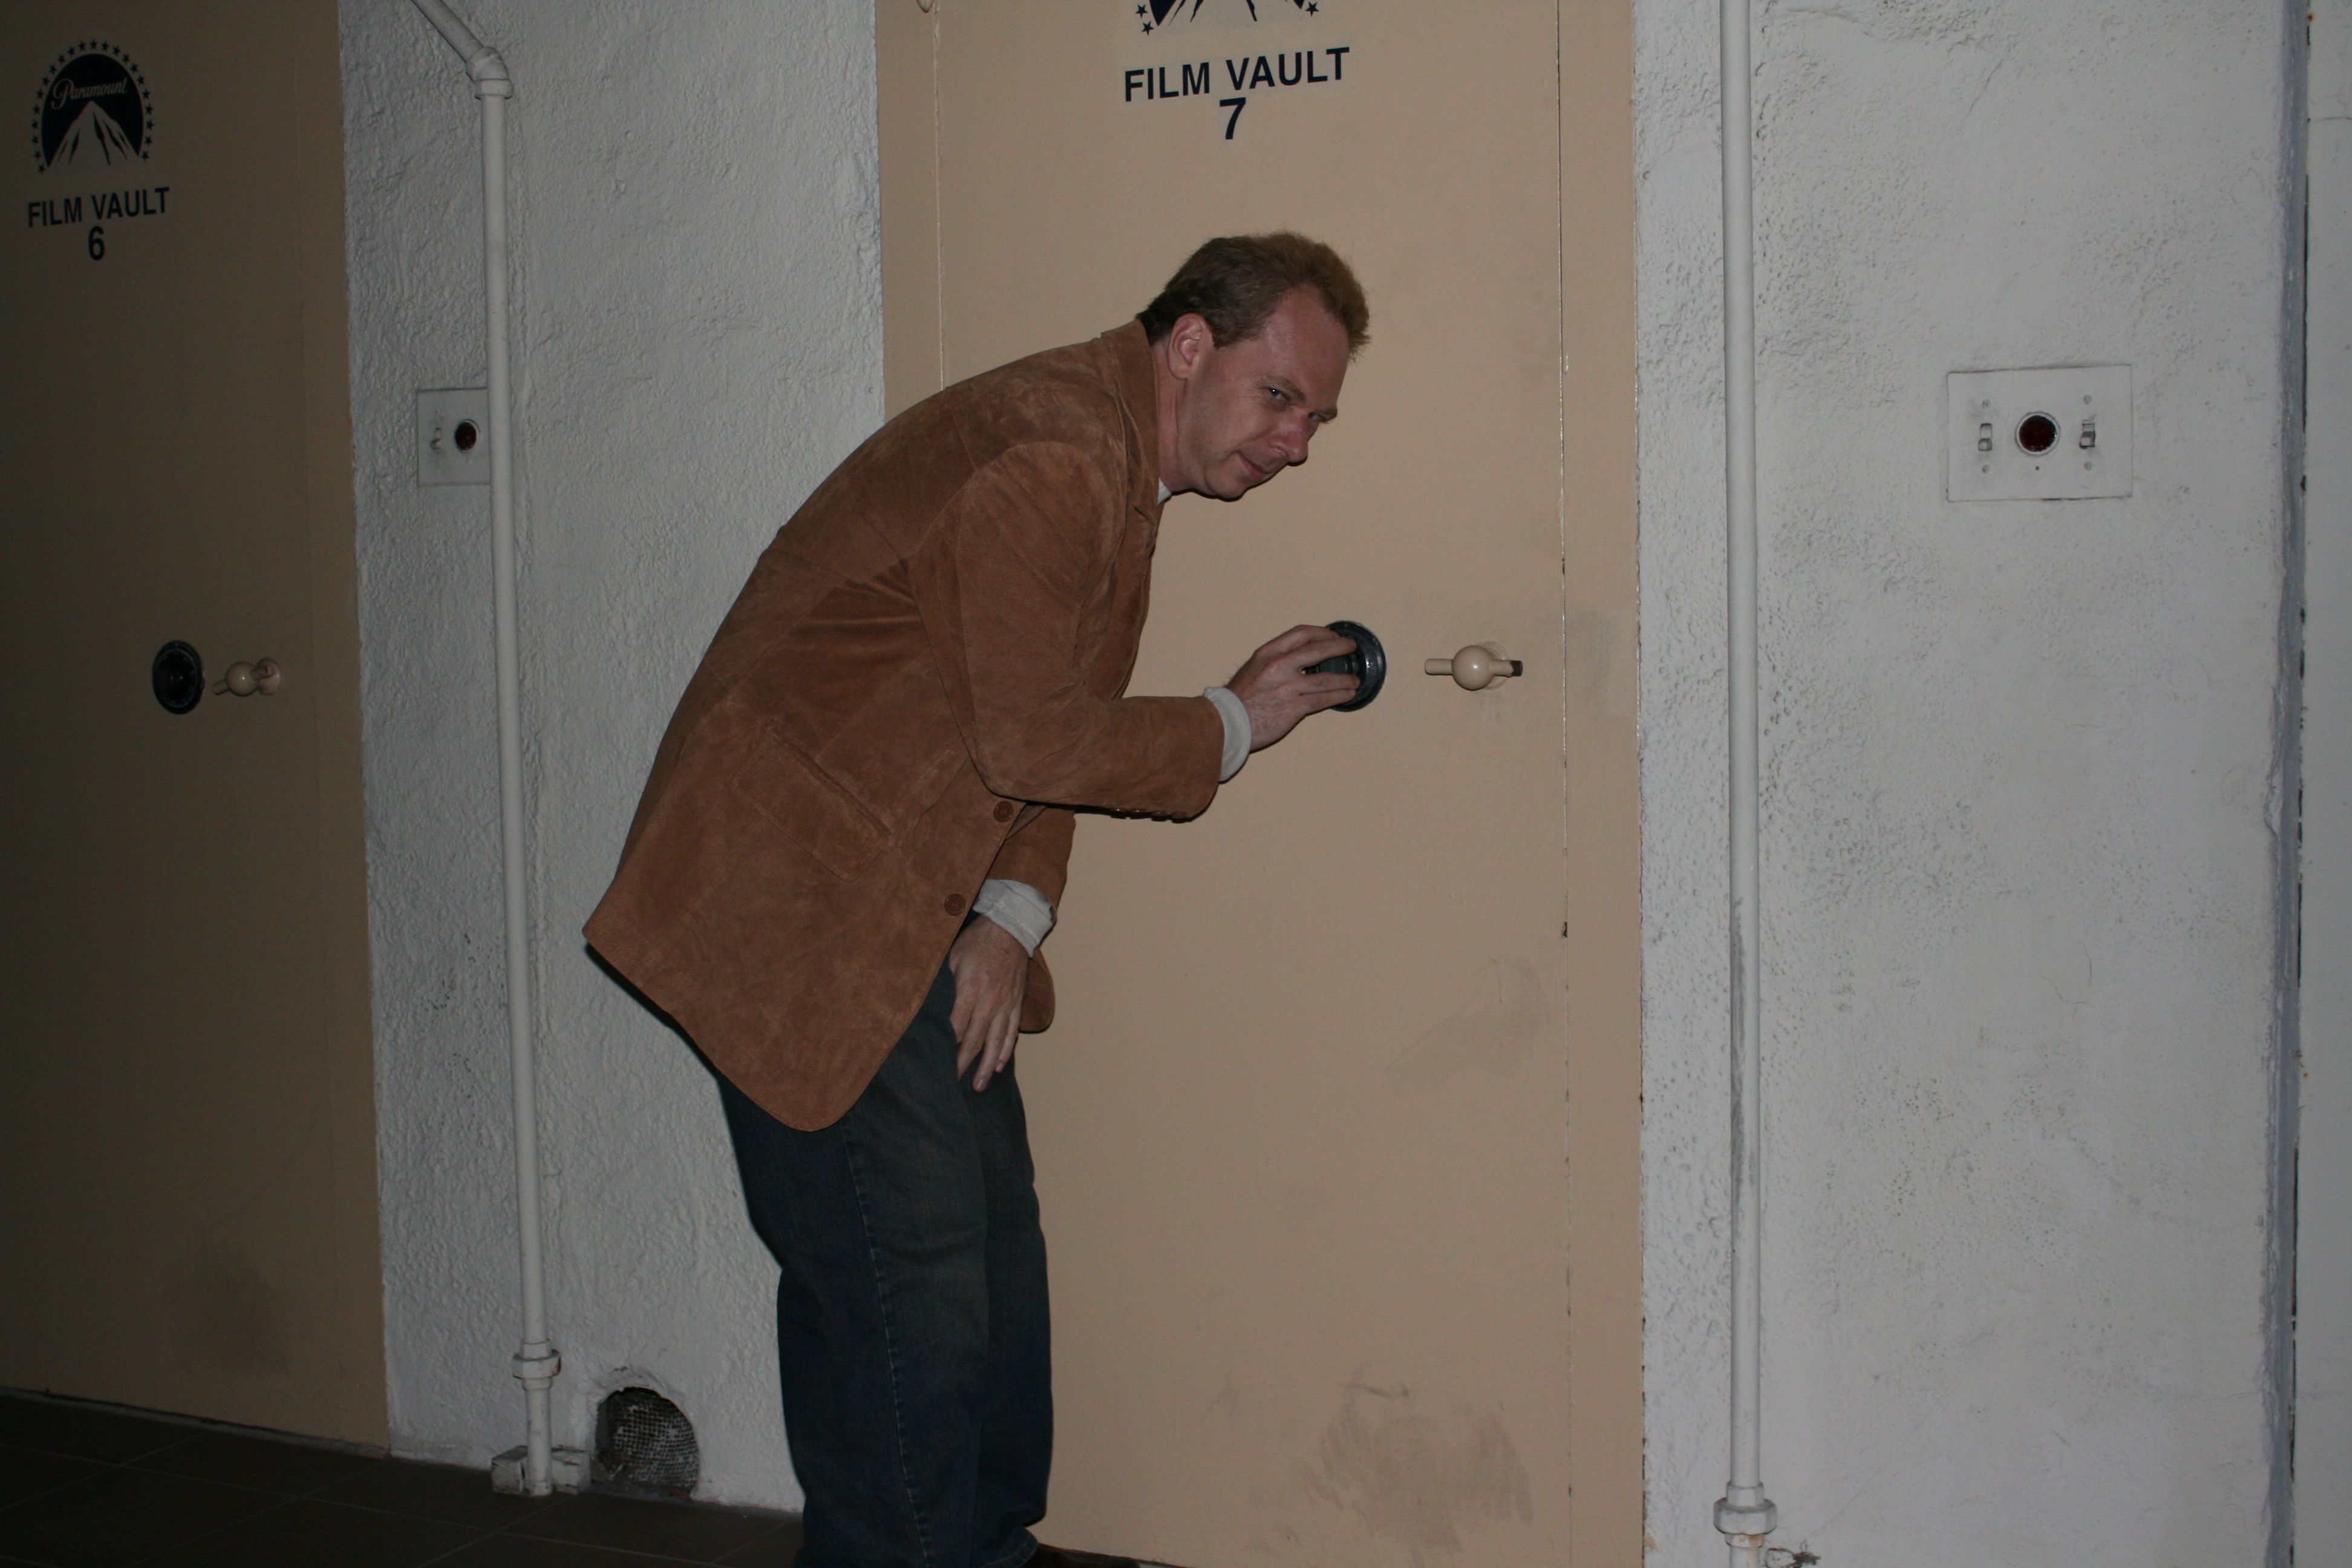 Breaking into the Paramount Vaults while on break from filming. He He He He.